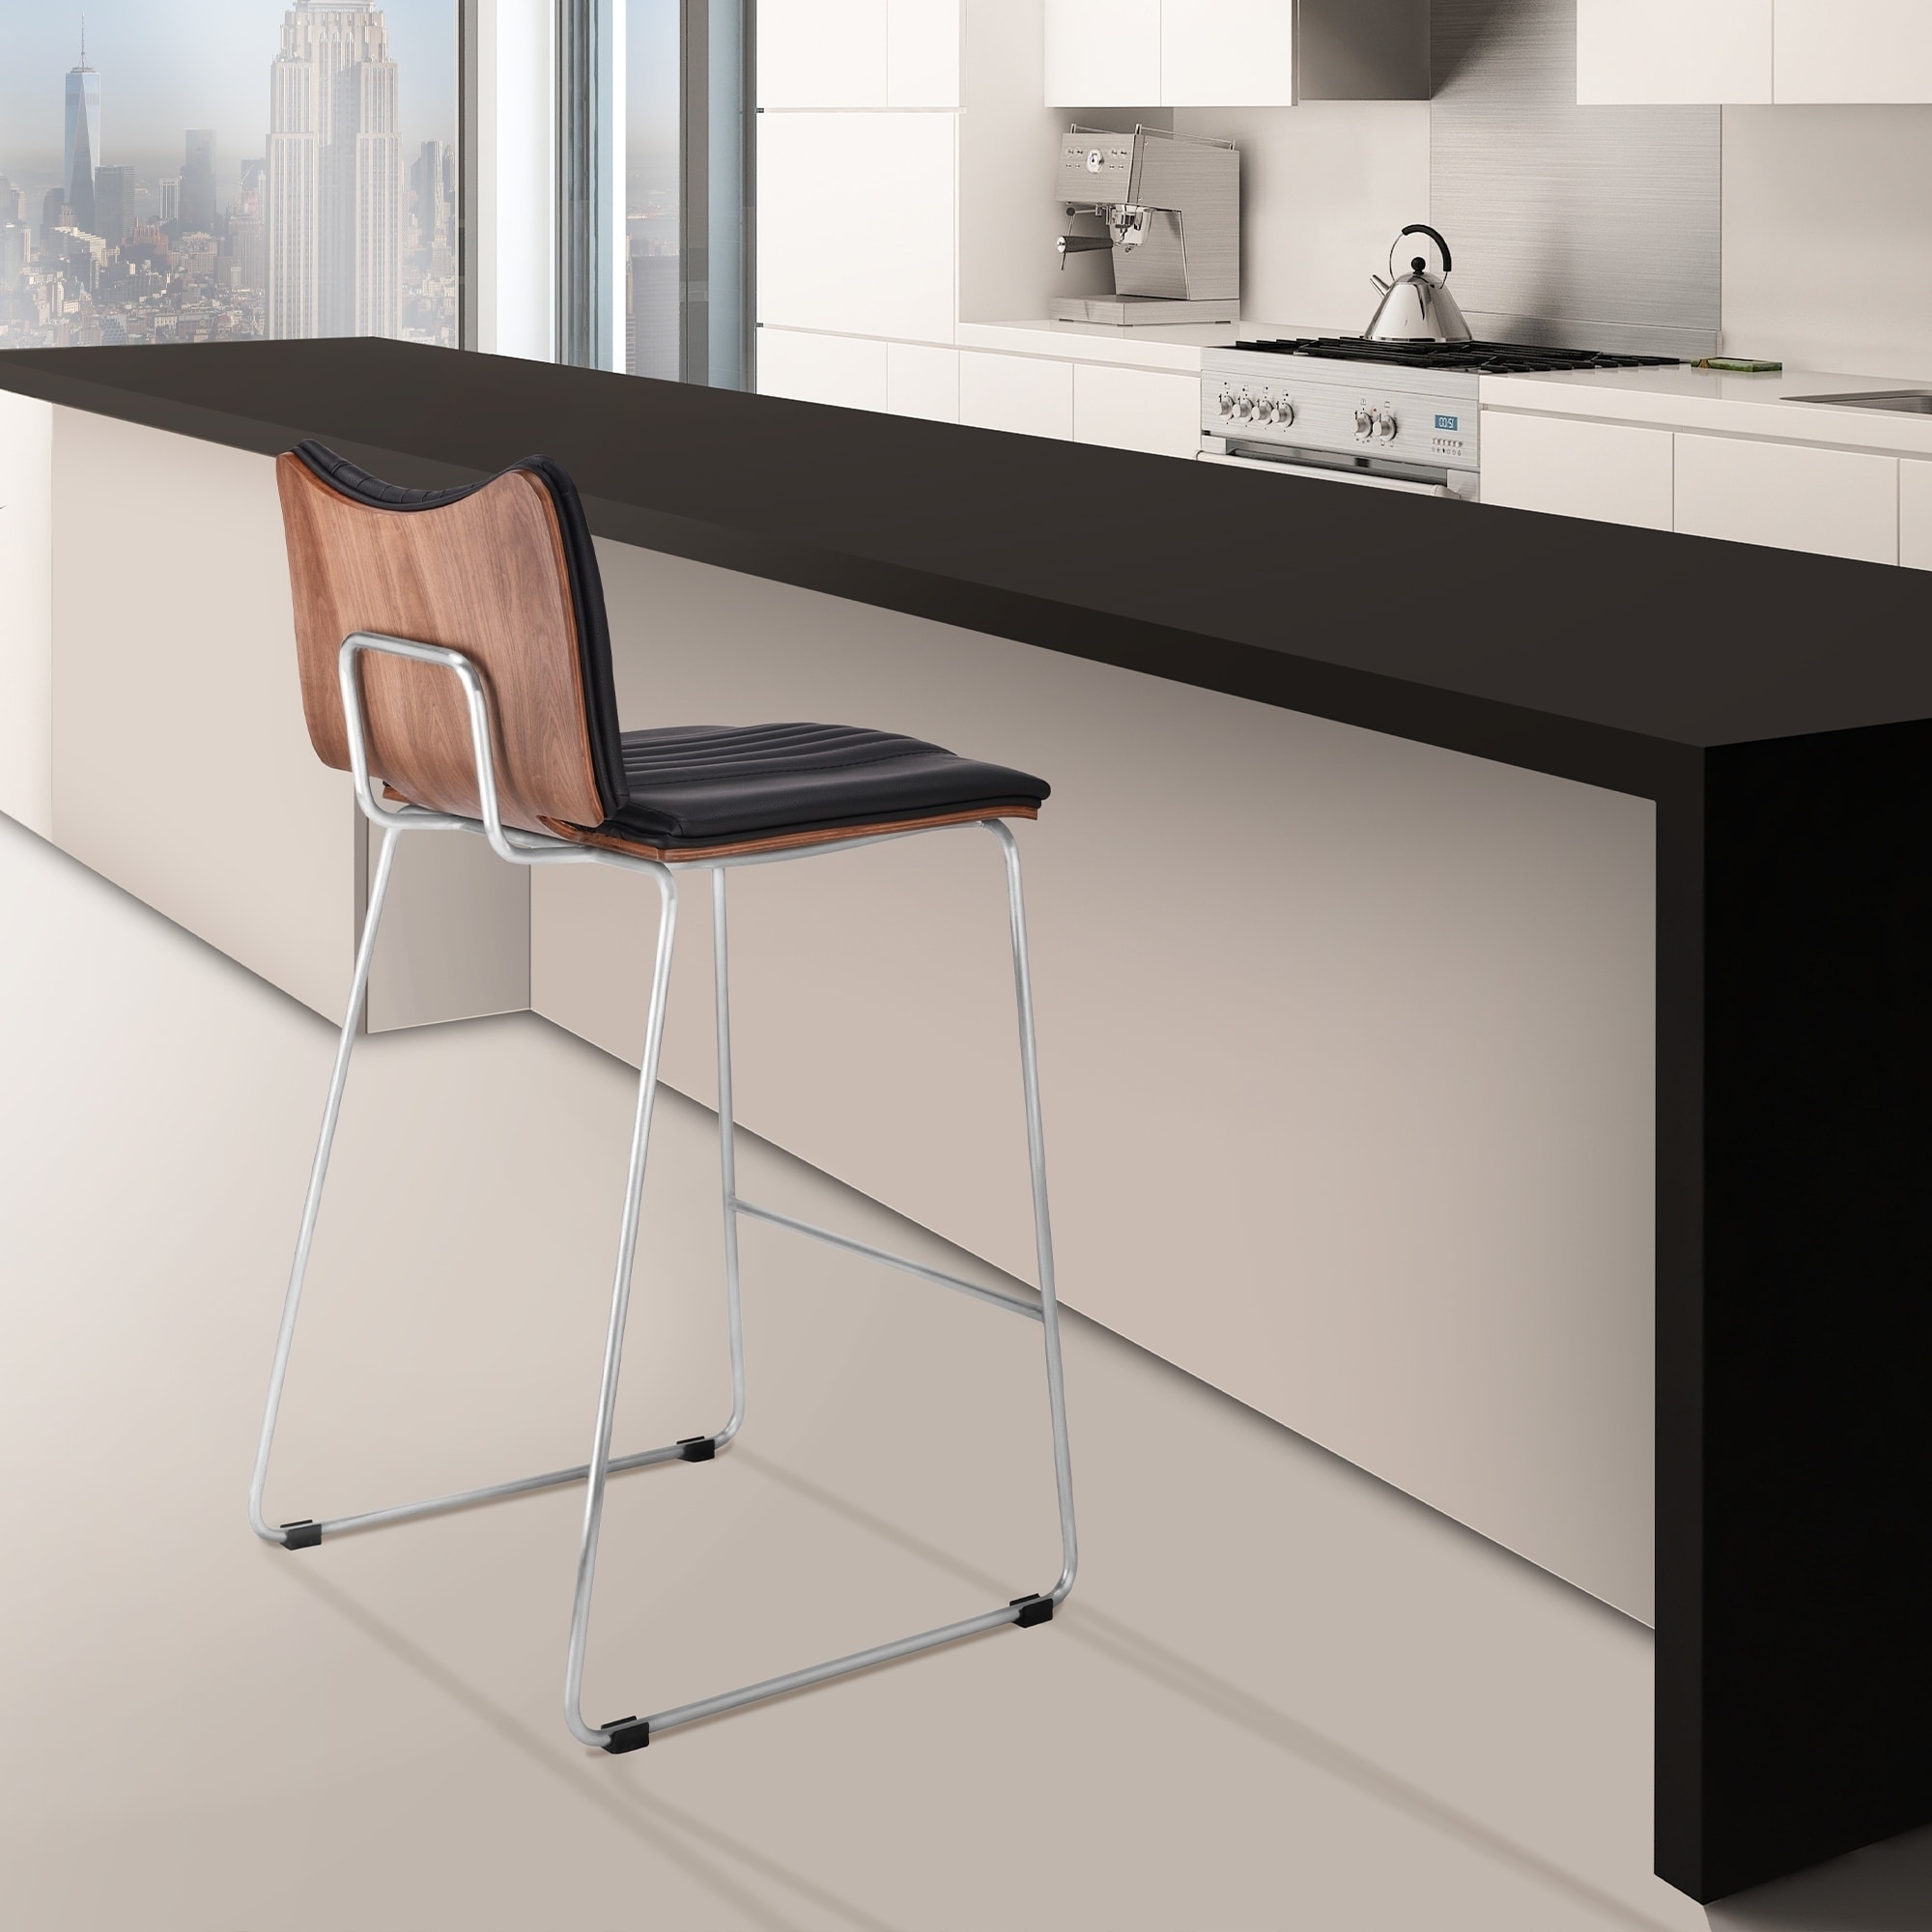 Stainless Steel Bar Stools Kitchen details about monica modern 26 counter height bar stool in brushed stainless steel with black